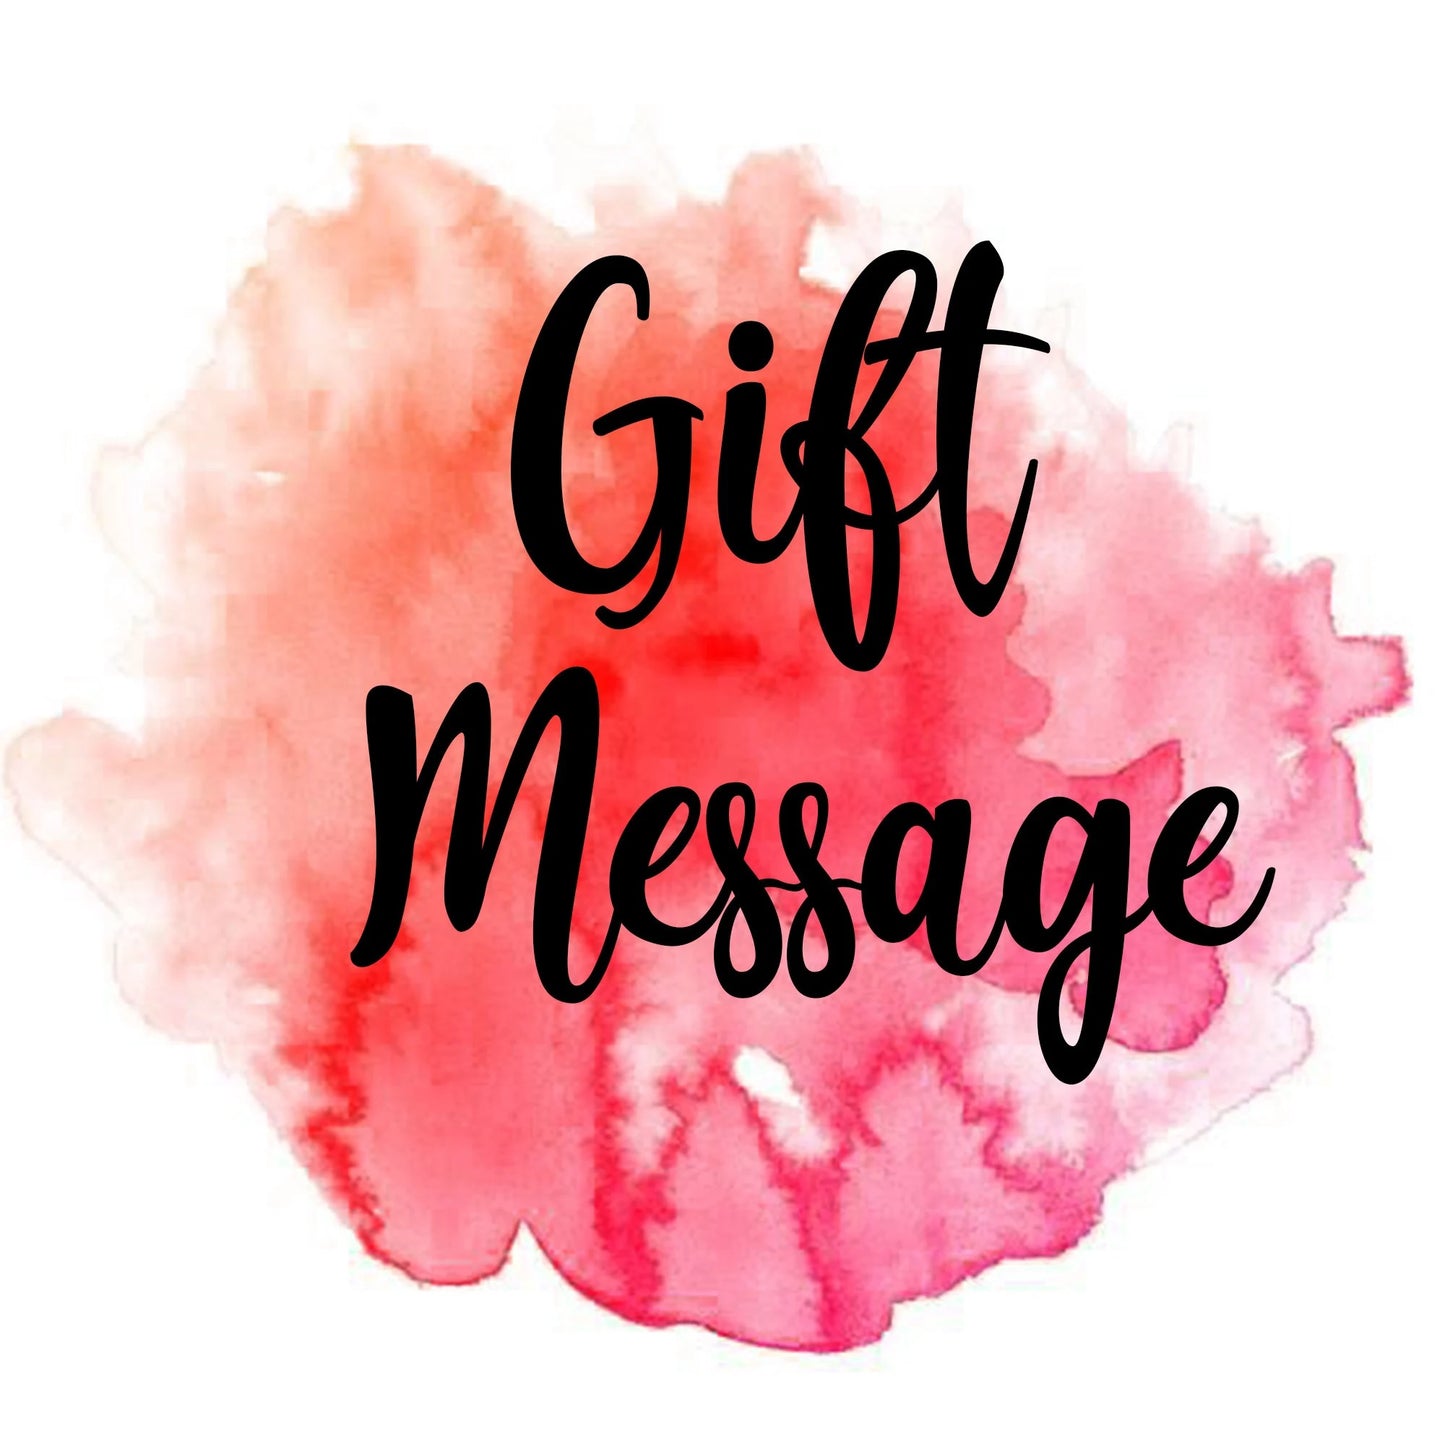 Would you like to add a gift message?